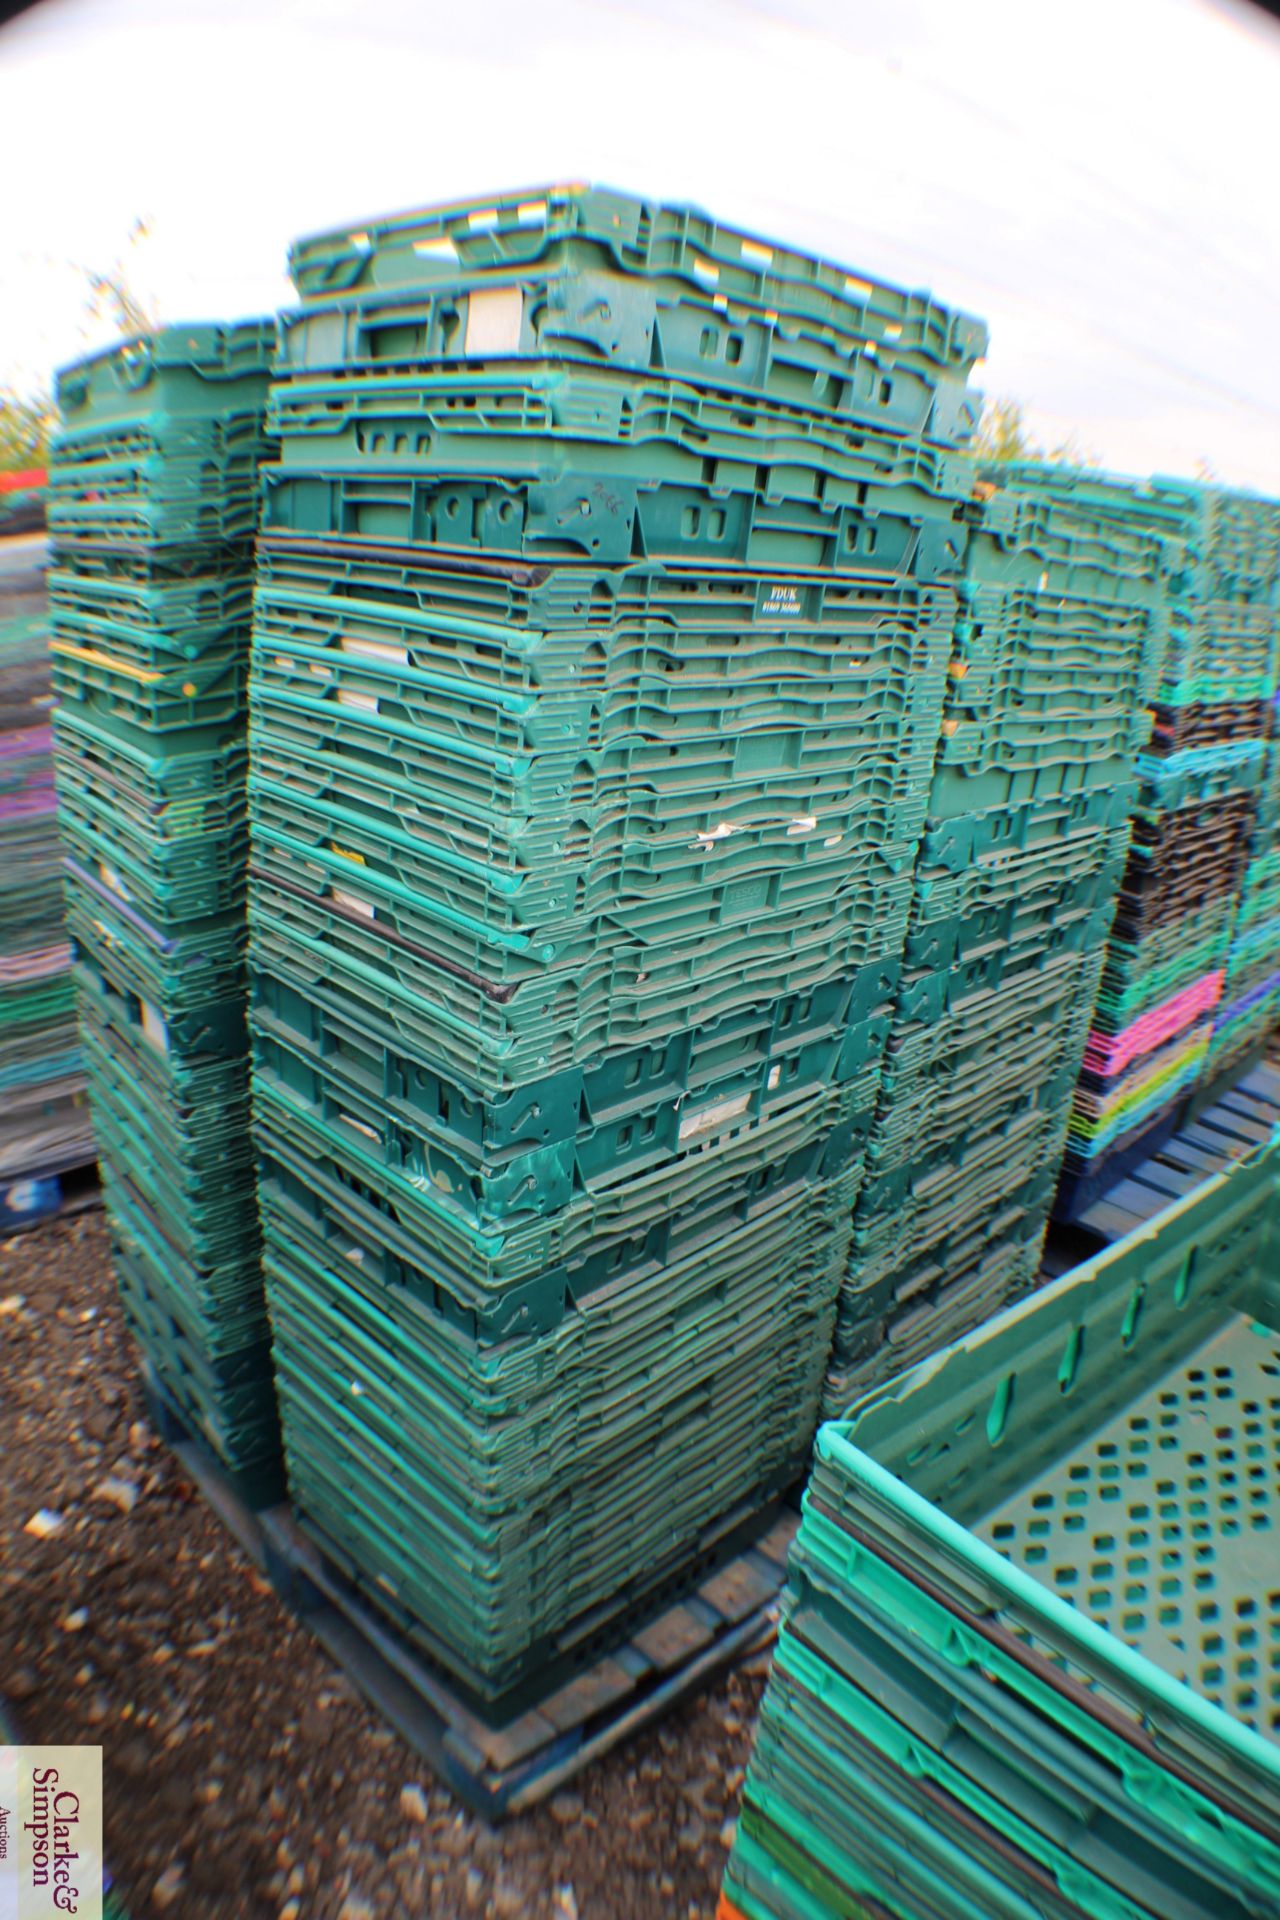 c.100x vegetable/ produce stacking crates.